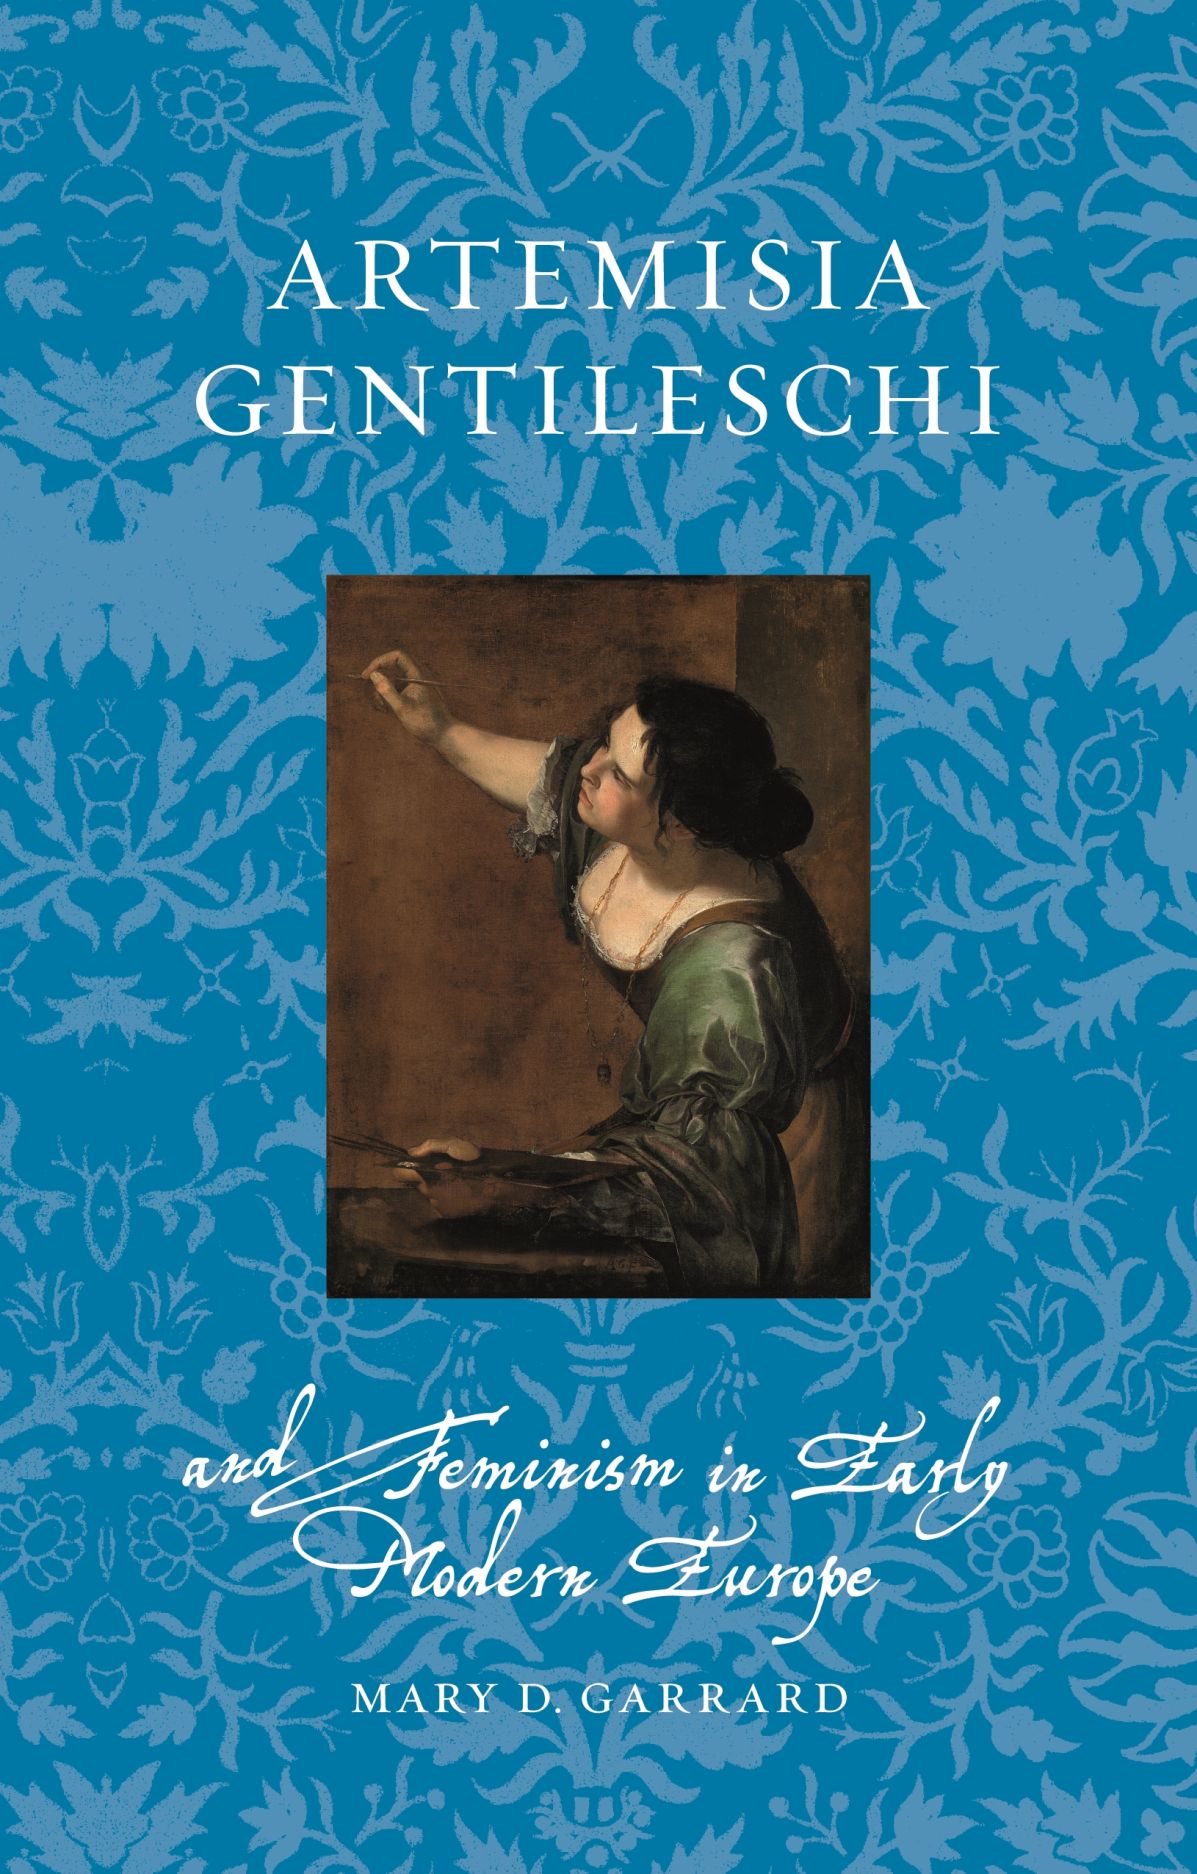 Book cover of Artemisia Gentileschi and Feminism in Early Modern Europe by Mary D. Garrard